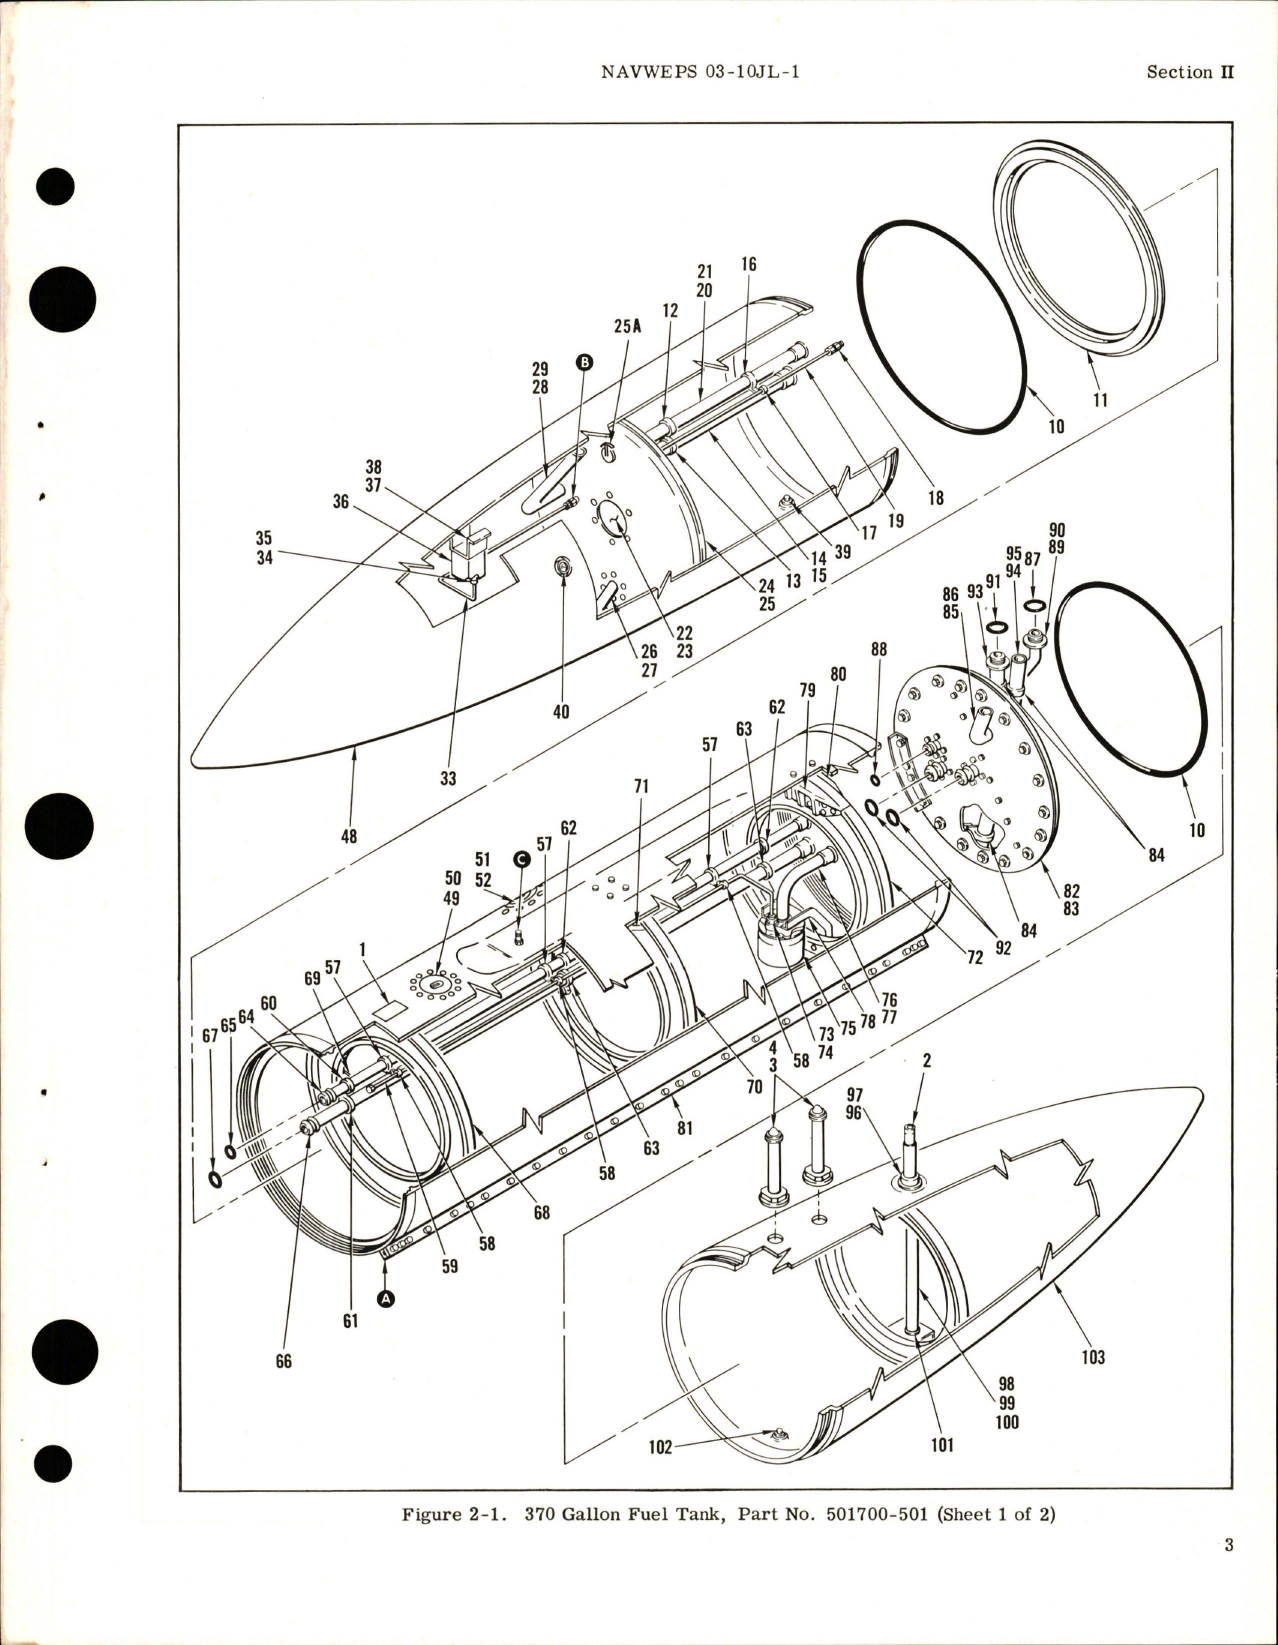 Sample page 7 from AirCorps Library document: Overhaul Instructions for 370 Gallon Fuel Tanks - Parts 501700, 501700-501